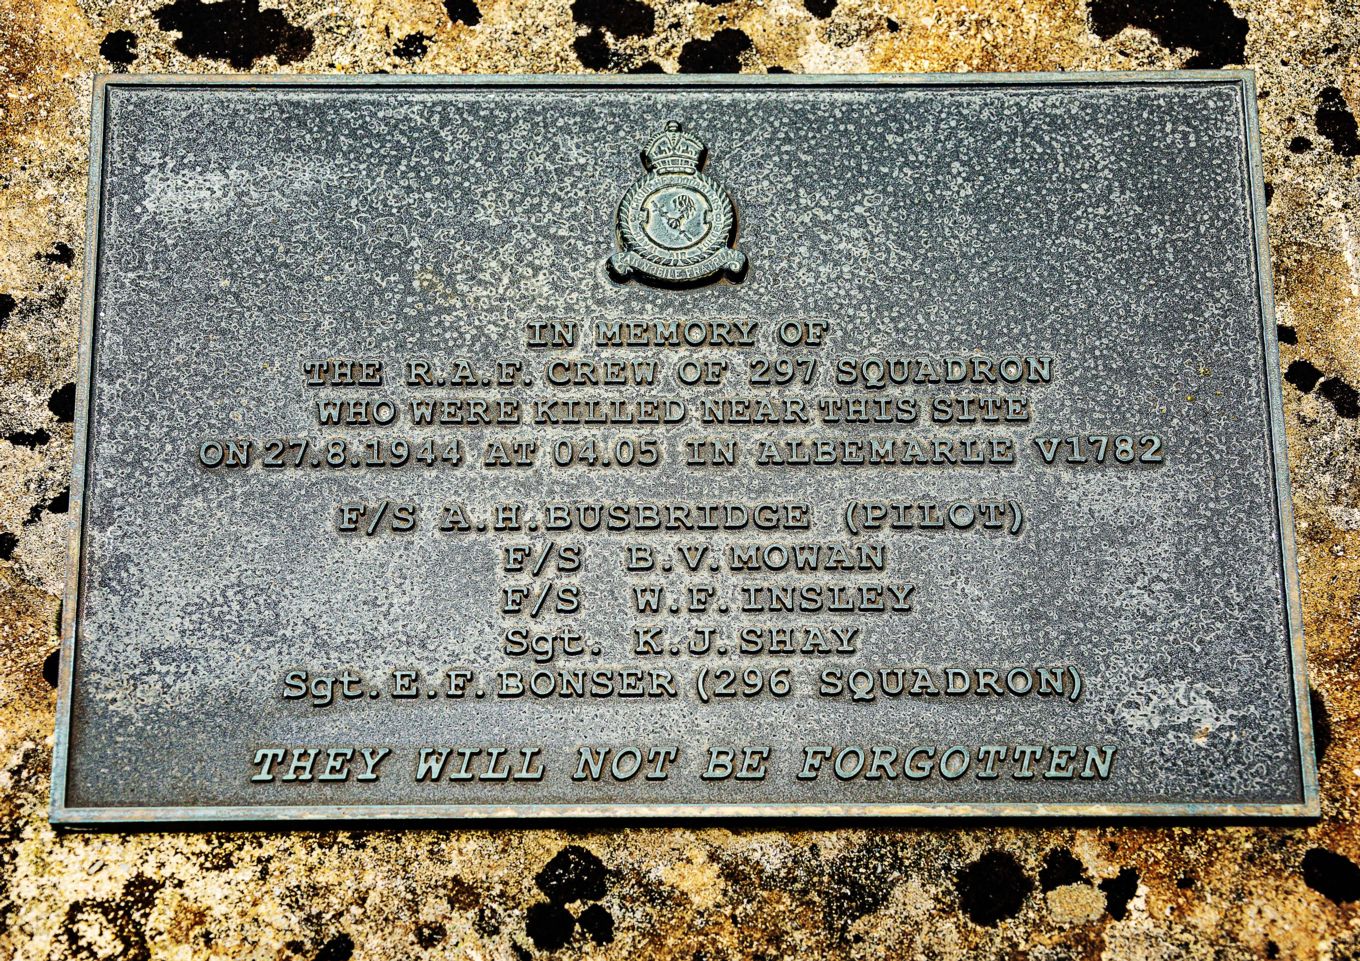 The memorial plaque... we will not forget them